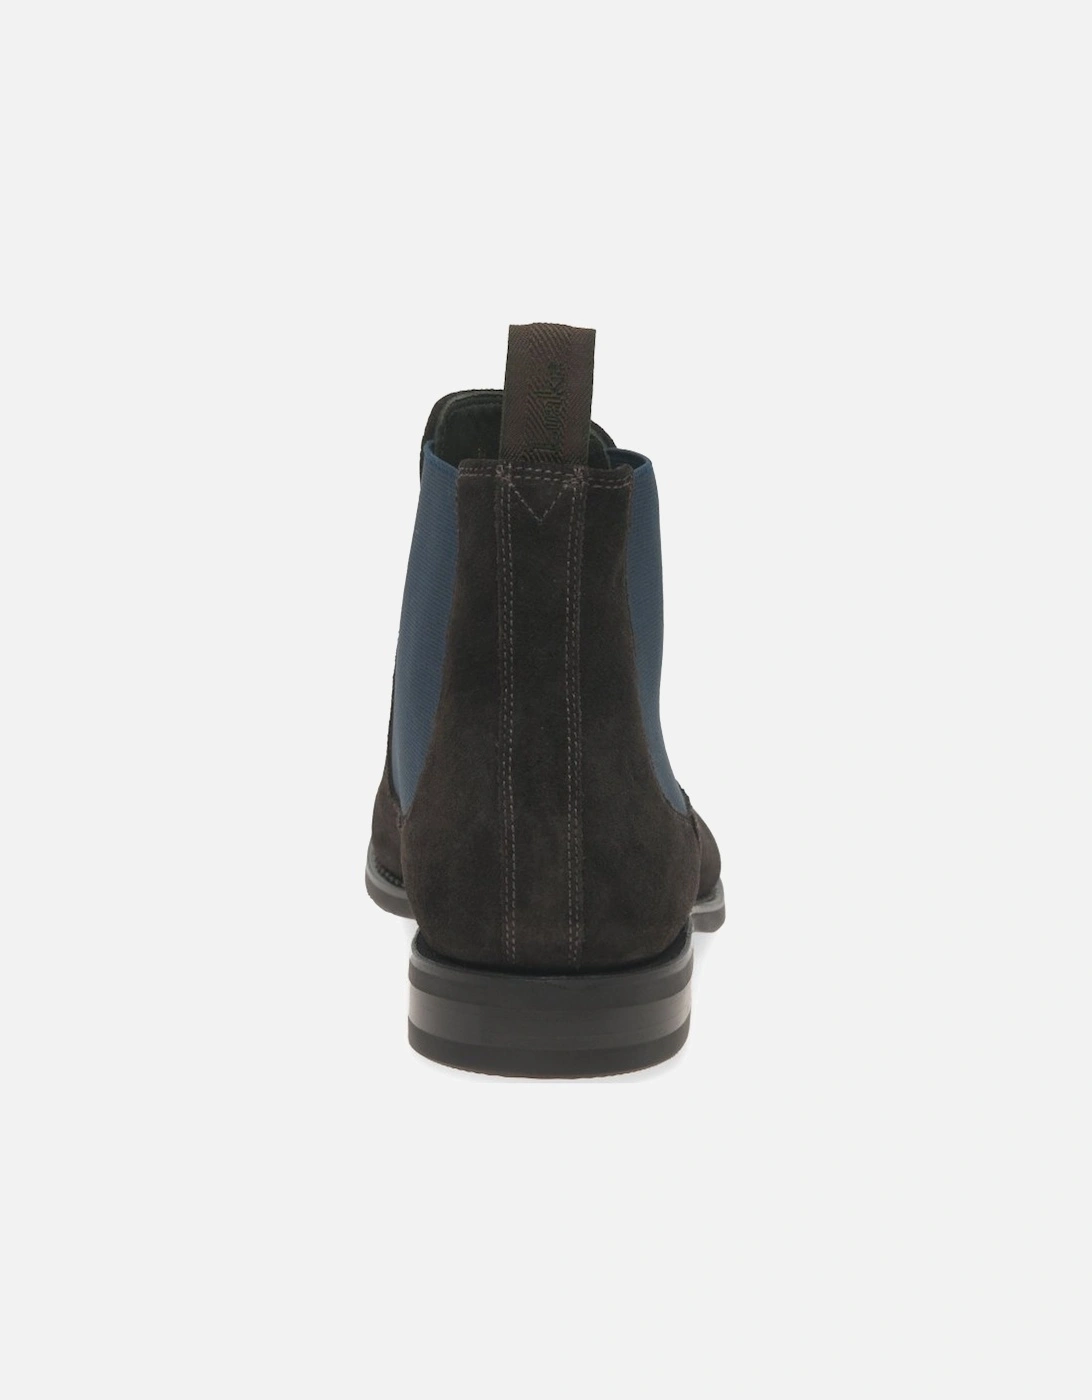 Wareing Mens Chelsea Boots